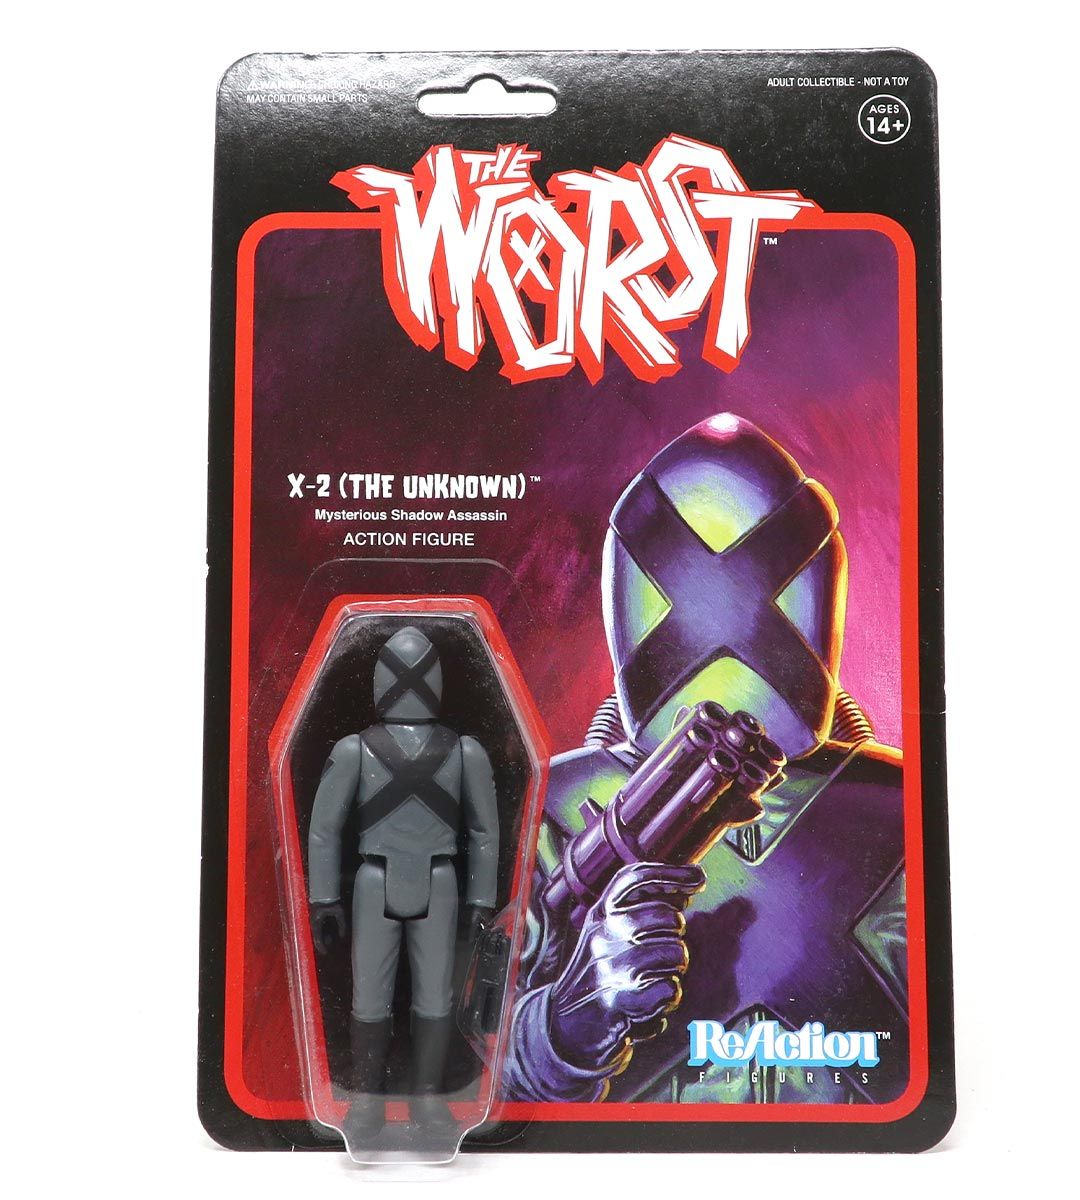 X-2 (the unknown) - The Worst - ReAction figures